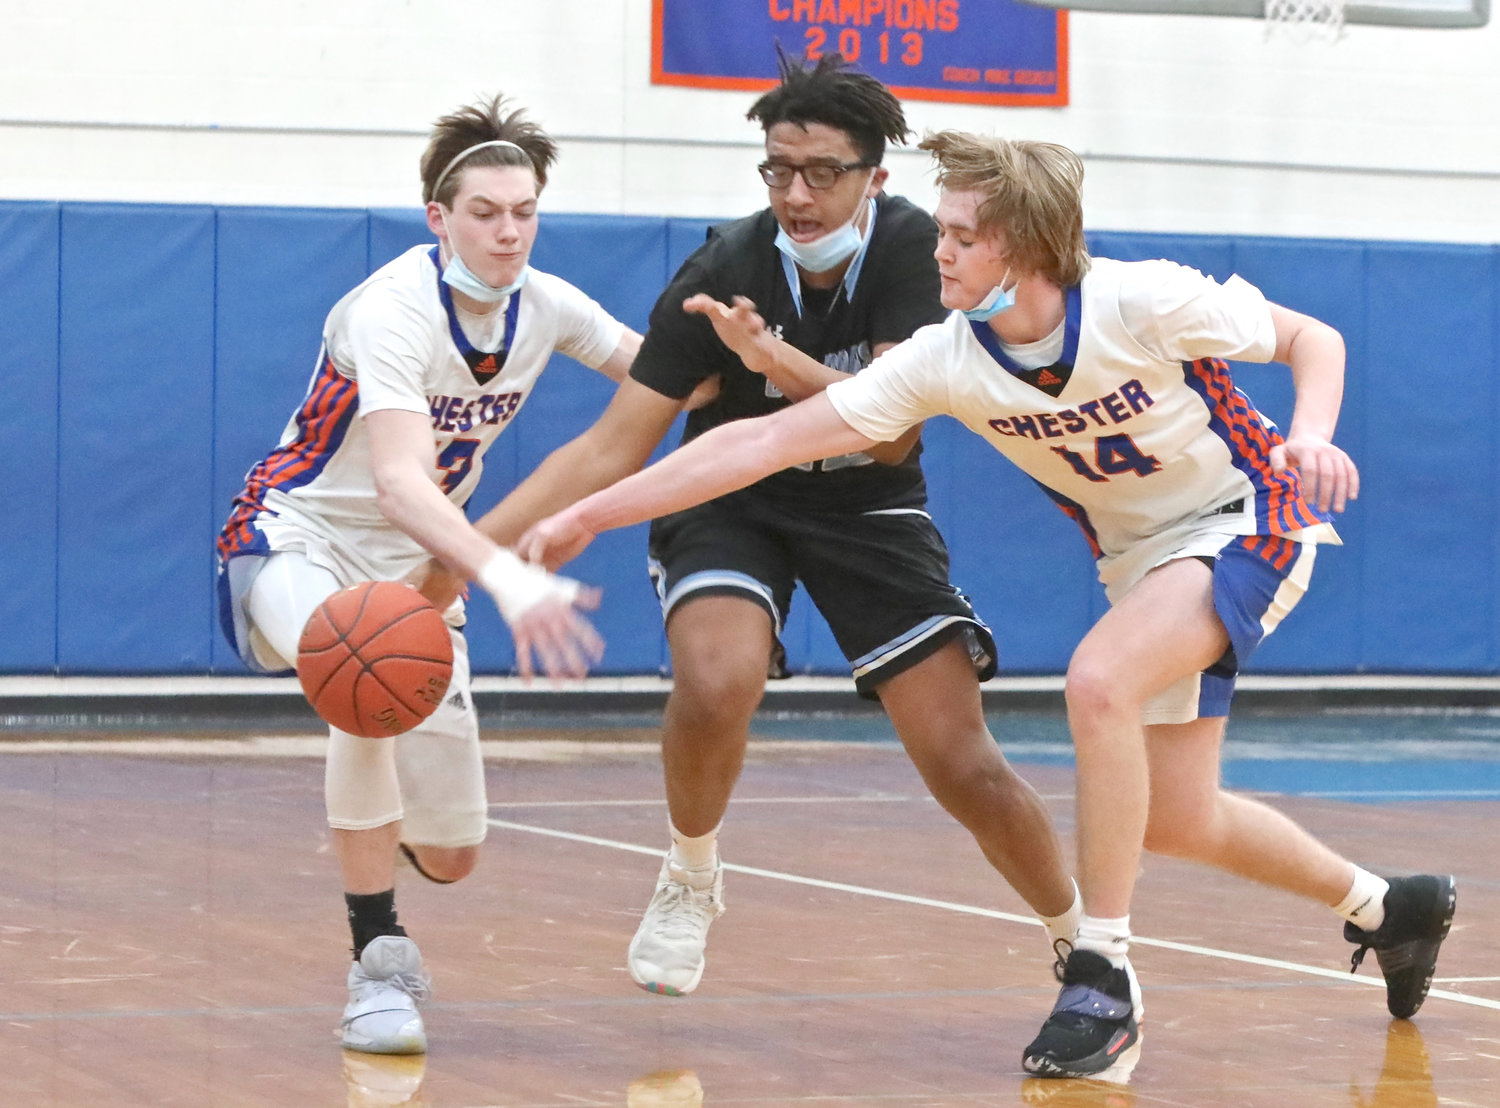 Crossfire: Sullivan West senior Tariq Gambari looks to advance the ball up the floor but is hampered by Chester’s Jimmy Lusignan (13) and Alex Bastian (14). Chester’s pressure on the ball was hard for Sullivan West to handle.